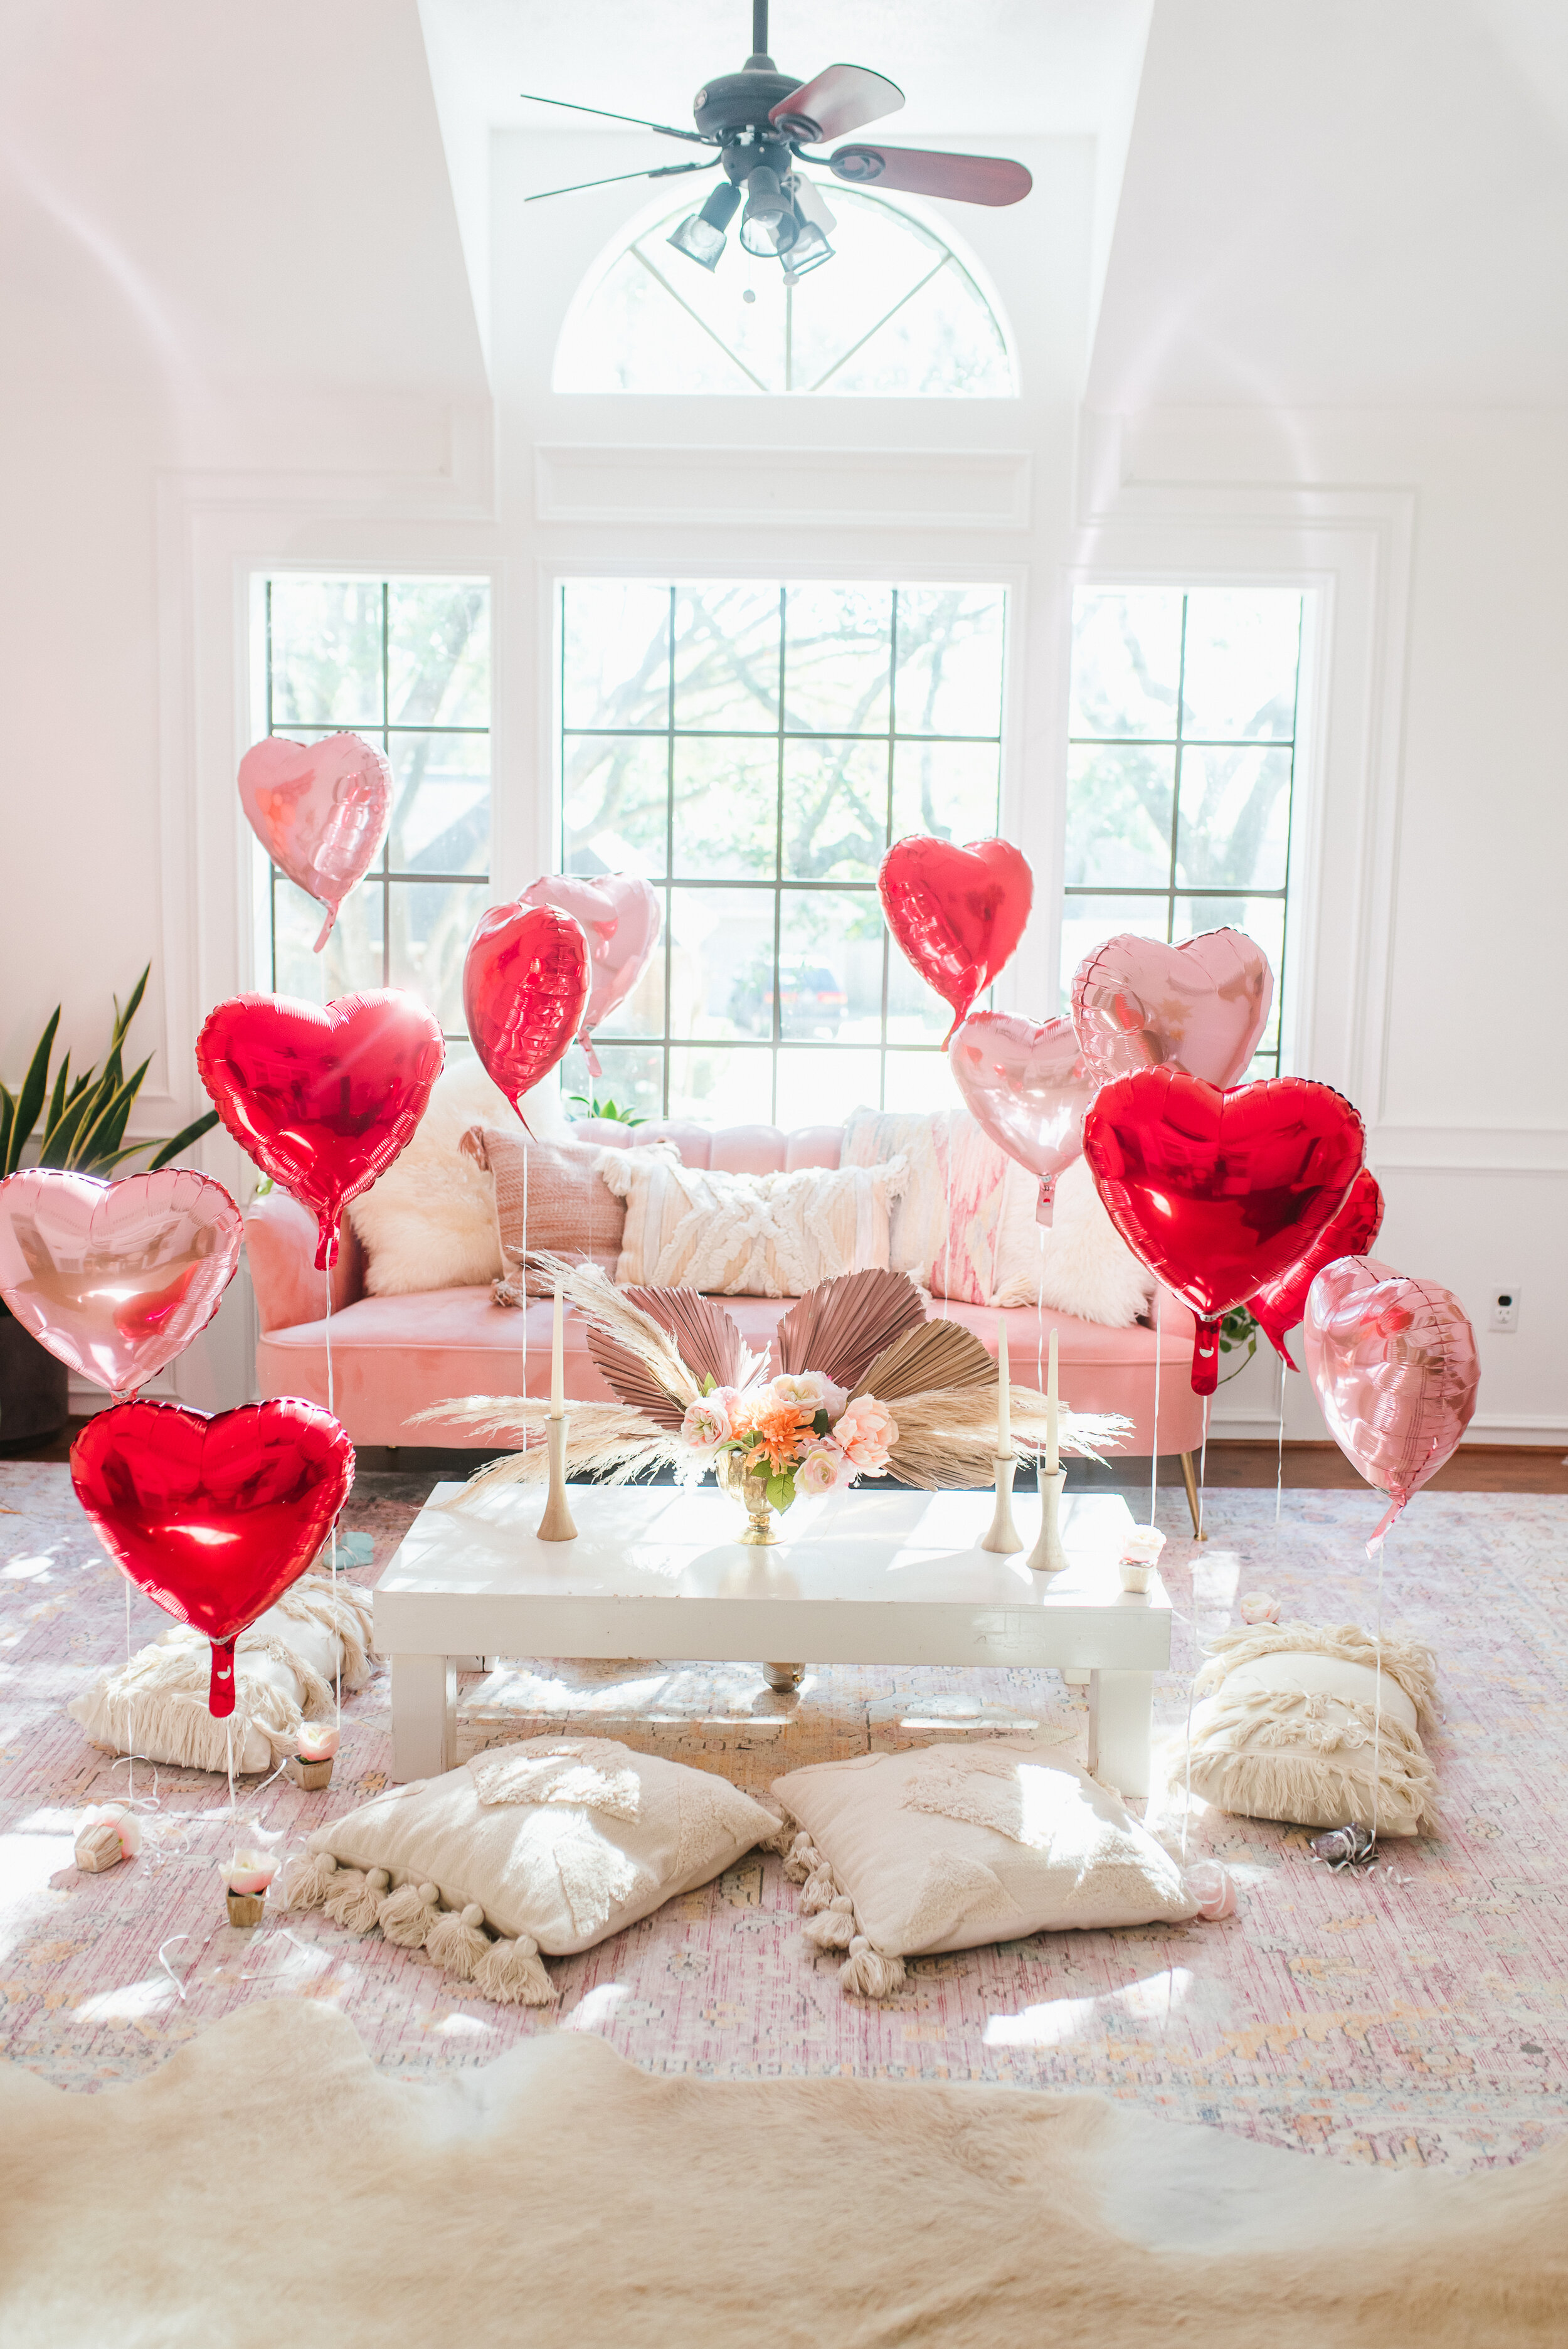 DIY valentine's day balloon photo backdrop on a budget for kids party